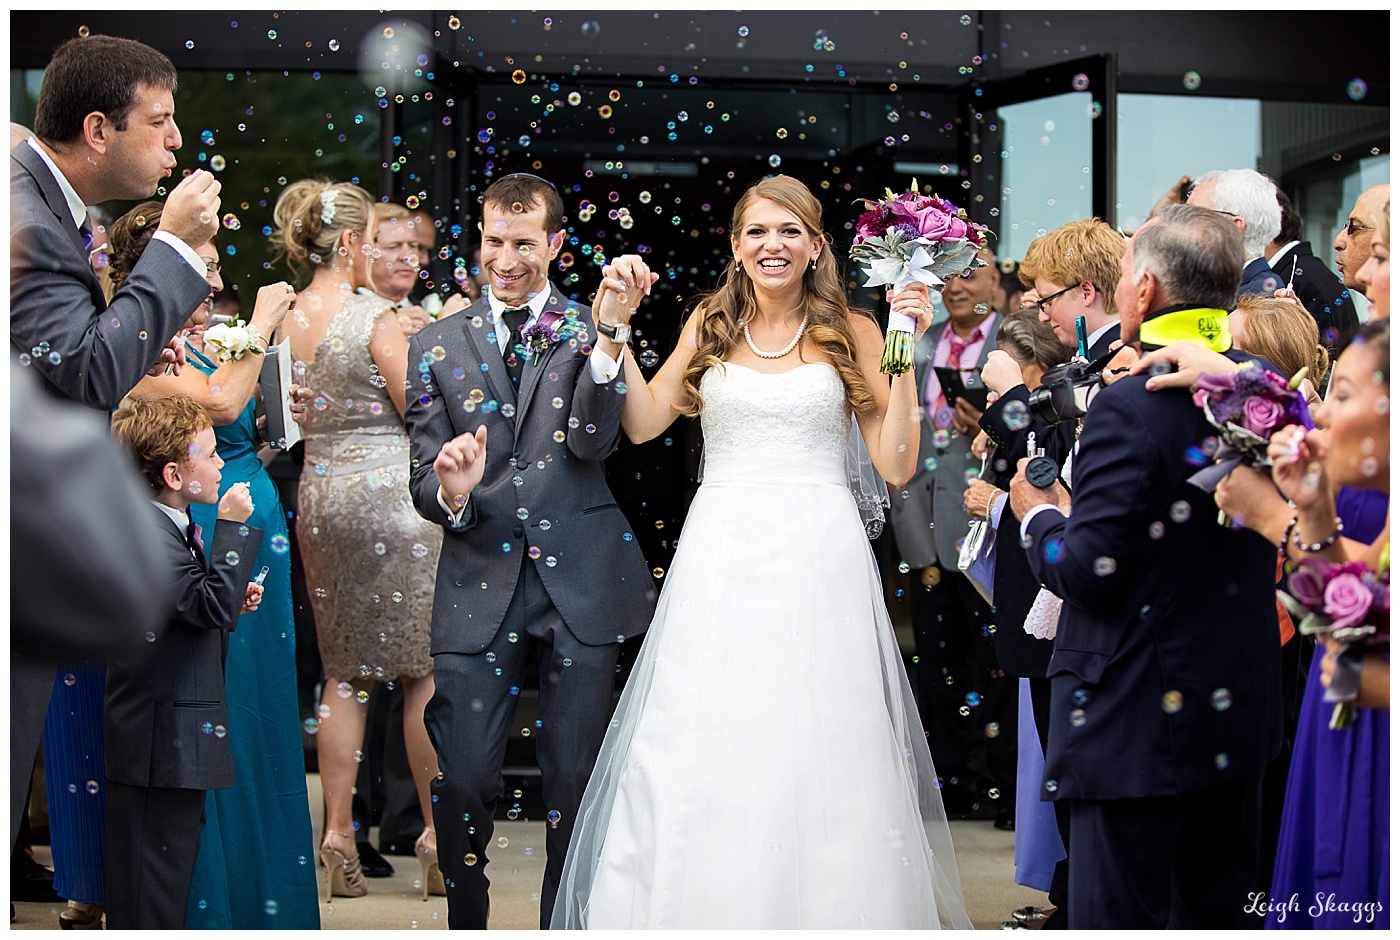 Remy & Michael are Married!  Their Virginia Beach Water Table wedding was such a fun day!!  